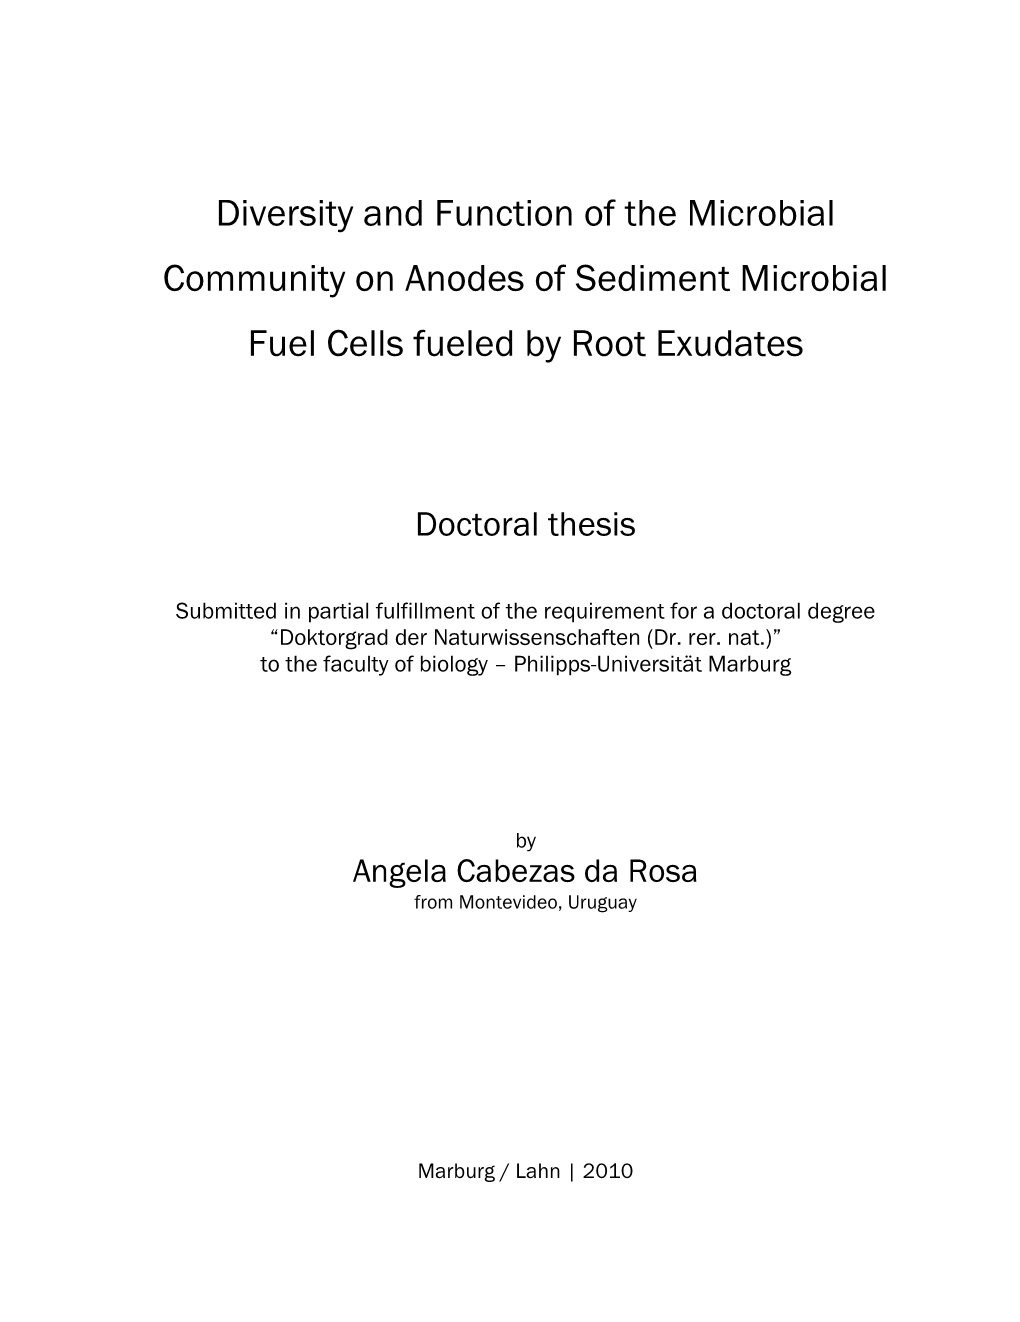 Diversity and Function of the Microbial Community on Anodes of Sediment Microbial Fuel Cells Fueled by Root Exudates